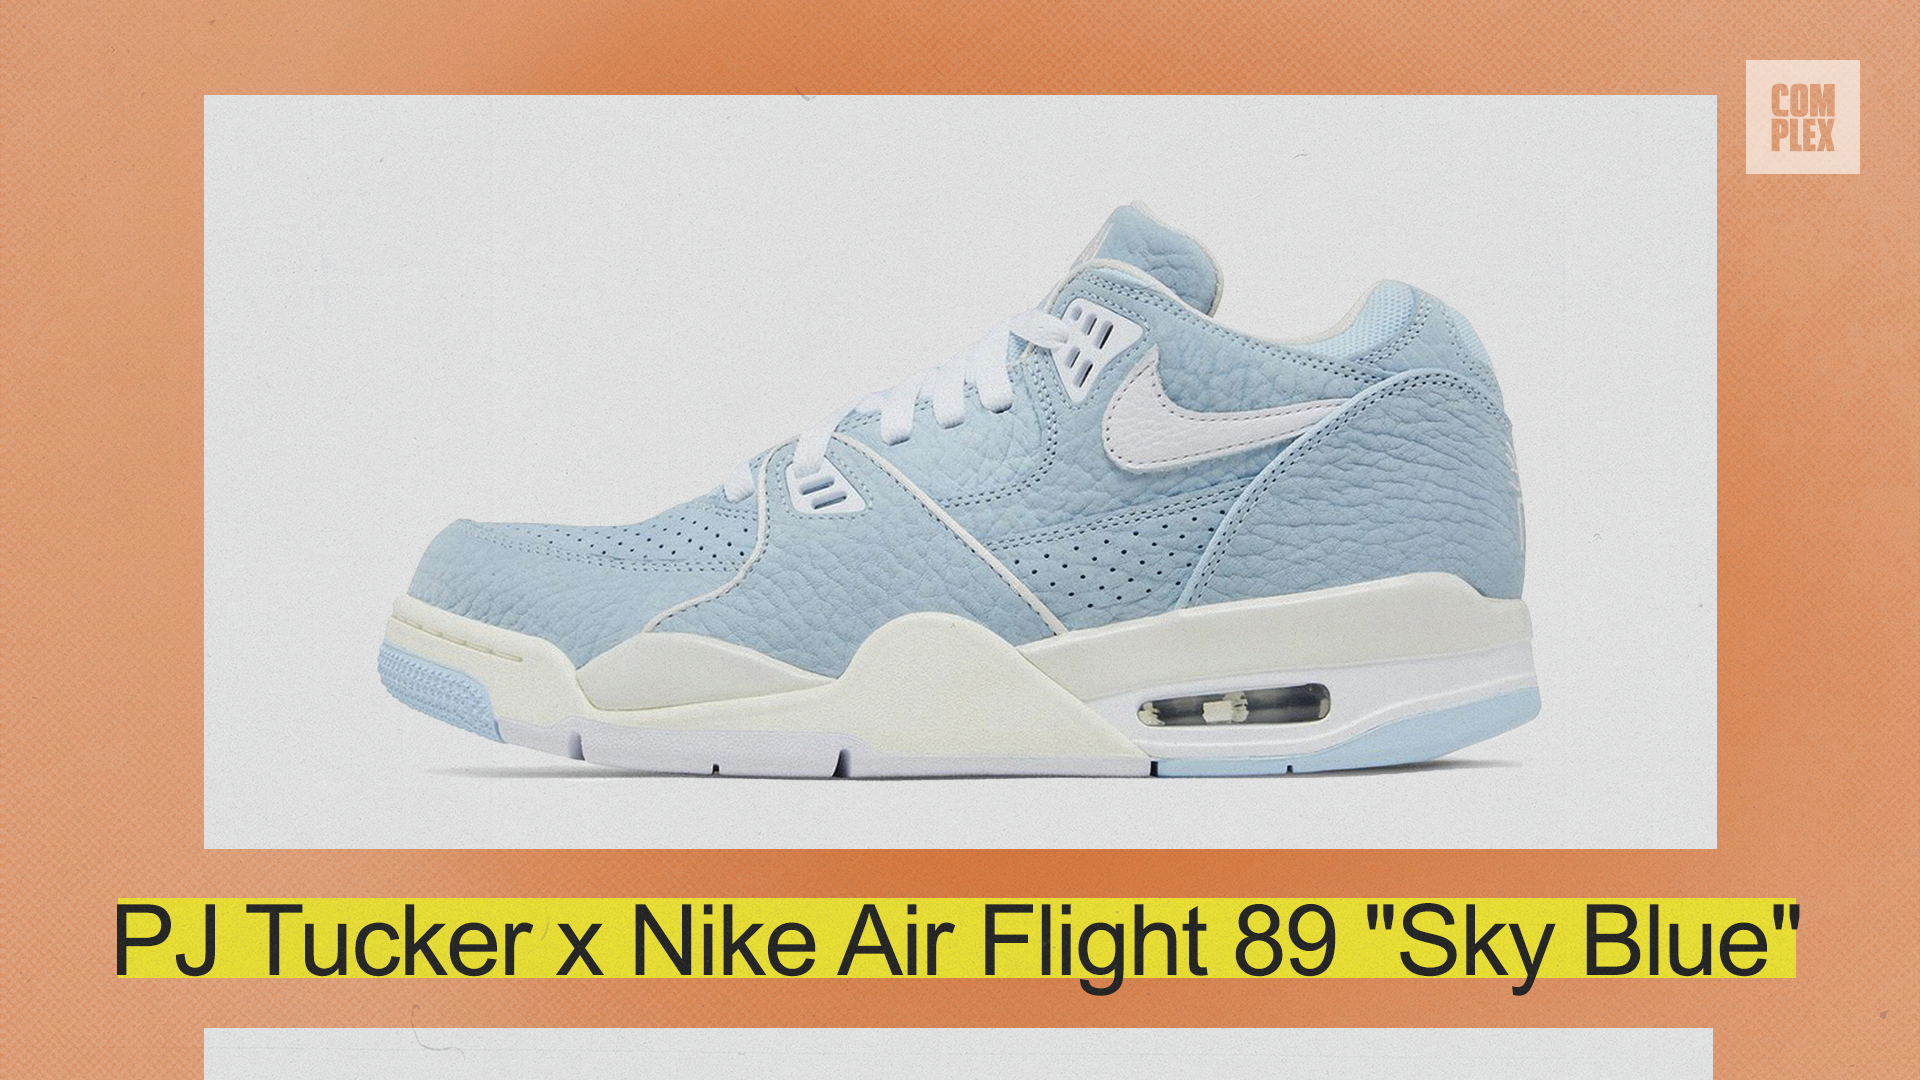 Nike Air Flight 89 &quot;Sky Blue&quot; sneaker collaboration with PJ Tucker, featuring a light blue textured design with white accents and a visible air unit. Text: &quot;PJ Tucker x Nike Air Flight 89 &#x27;Sky Blue&#x27;&quot;